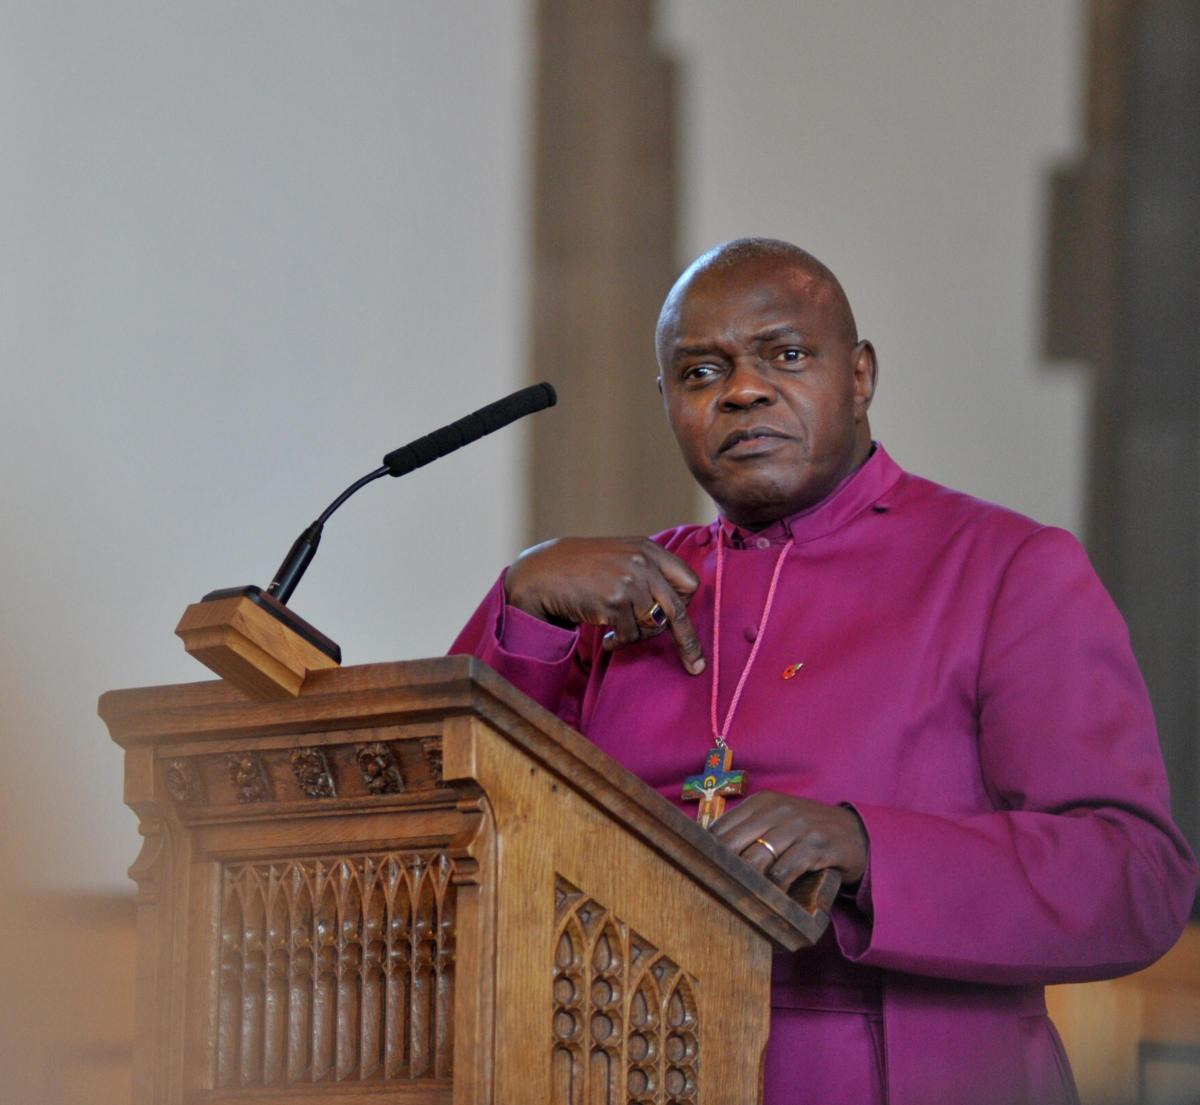 The Archbishop of York the Most Rev John Sentamu speaking from the lectern in Blackburn Cathedral  on Tuesday  during his 'Light into Darkness' event.